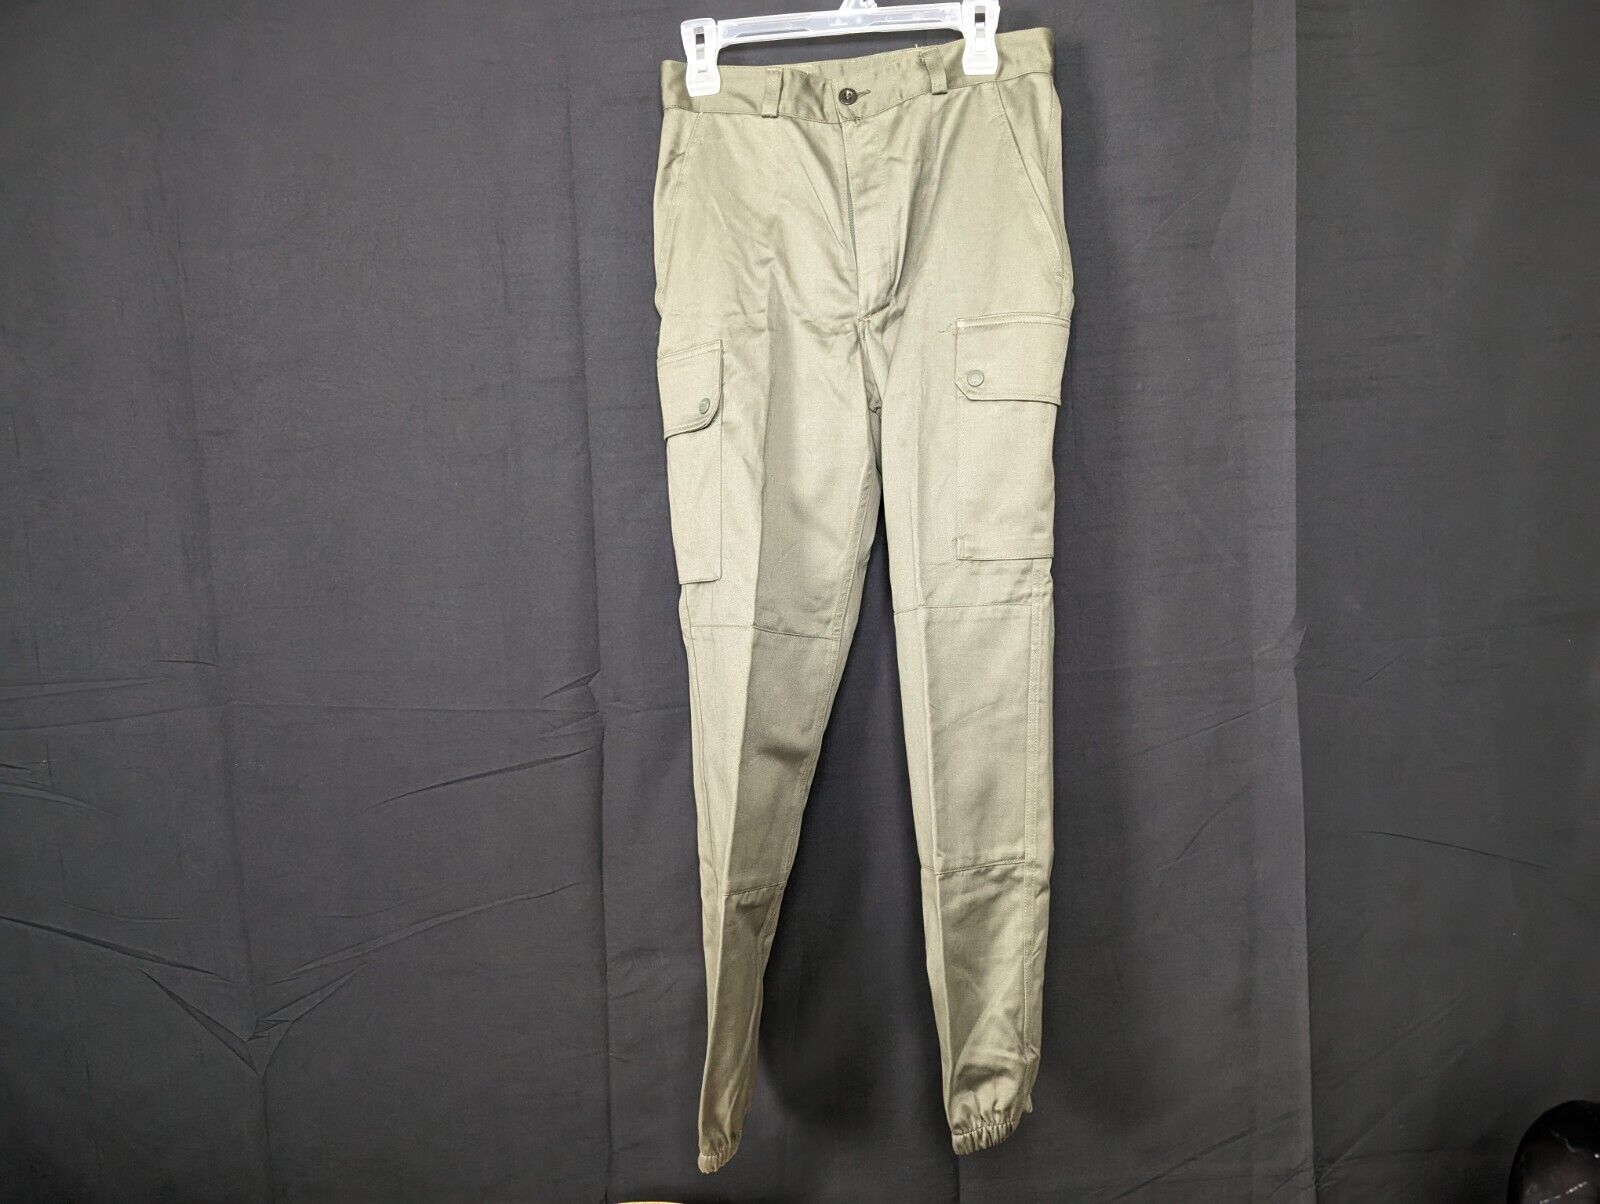 French Military F1 Cargo Pants SIZE 76L 30x28 Vintage NOS Uniform Deadstock 